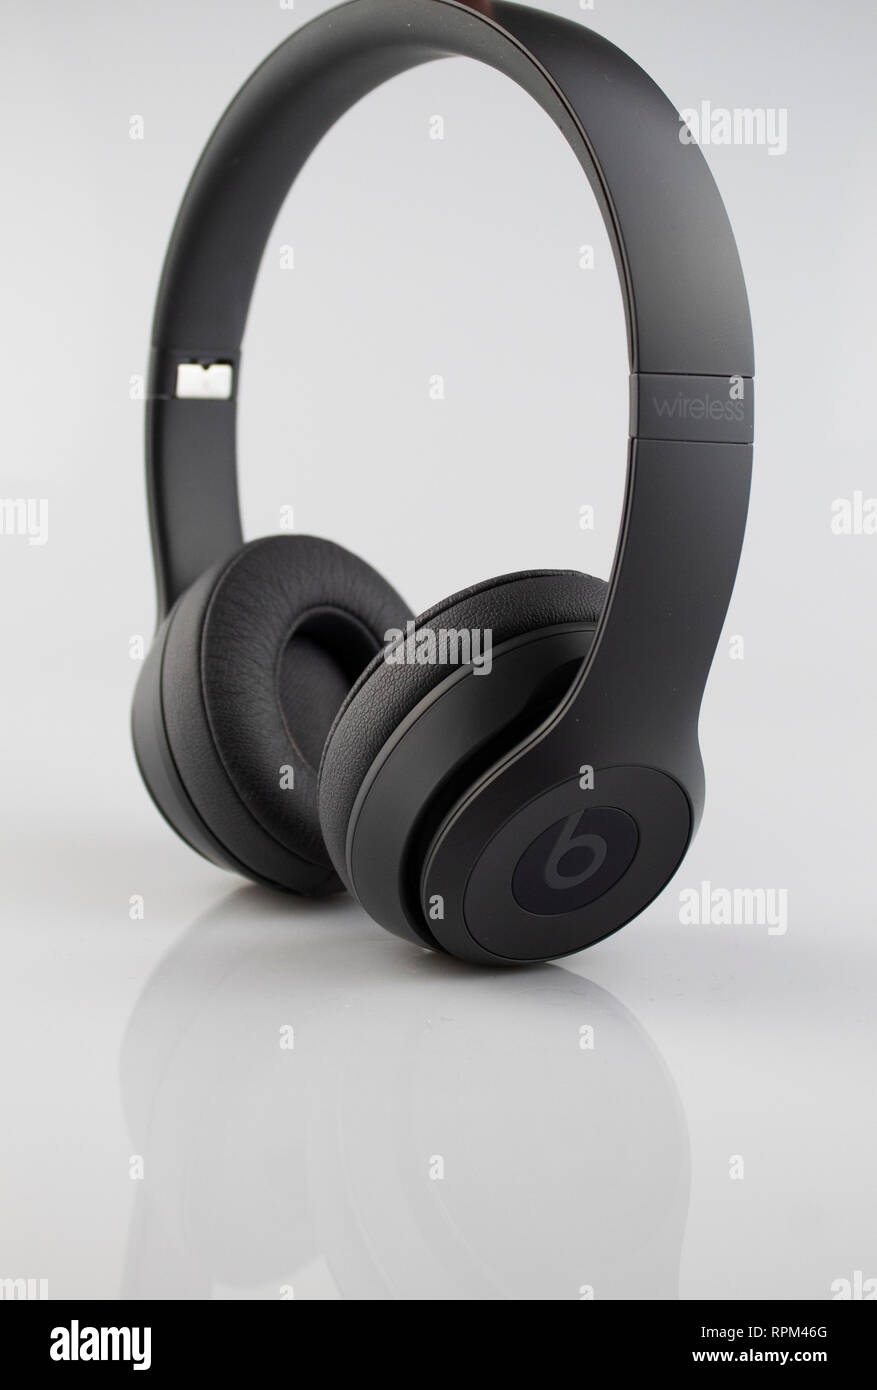 Beats Headphone High Resolution Stock Photography and Images - Alamy